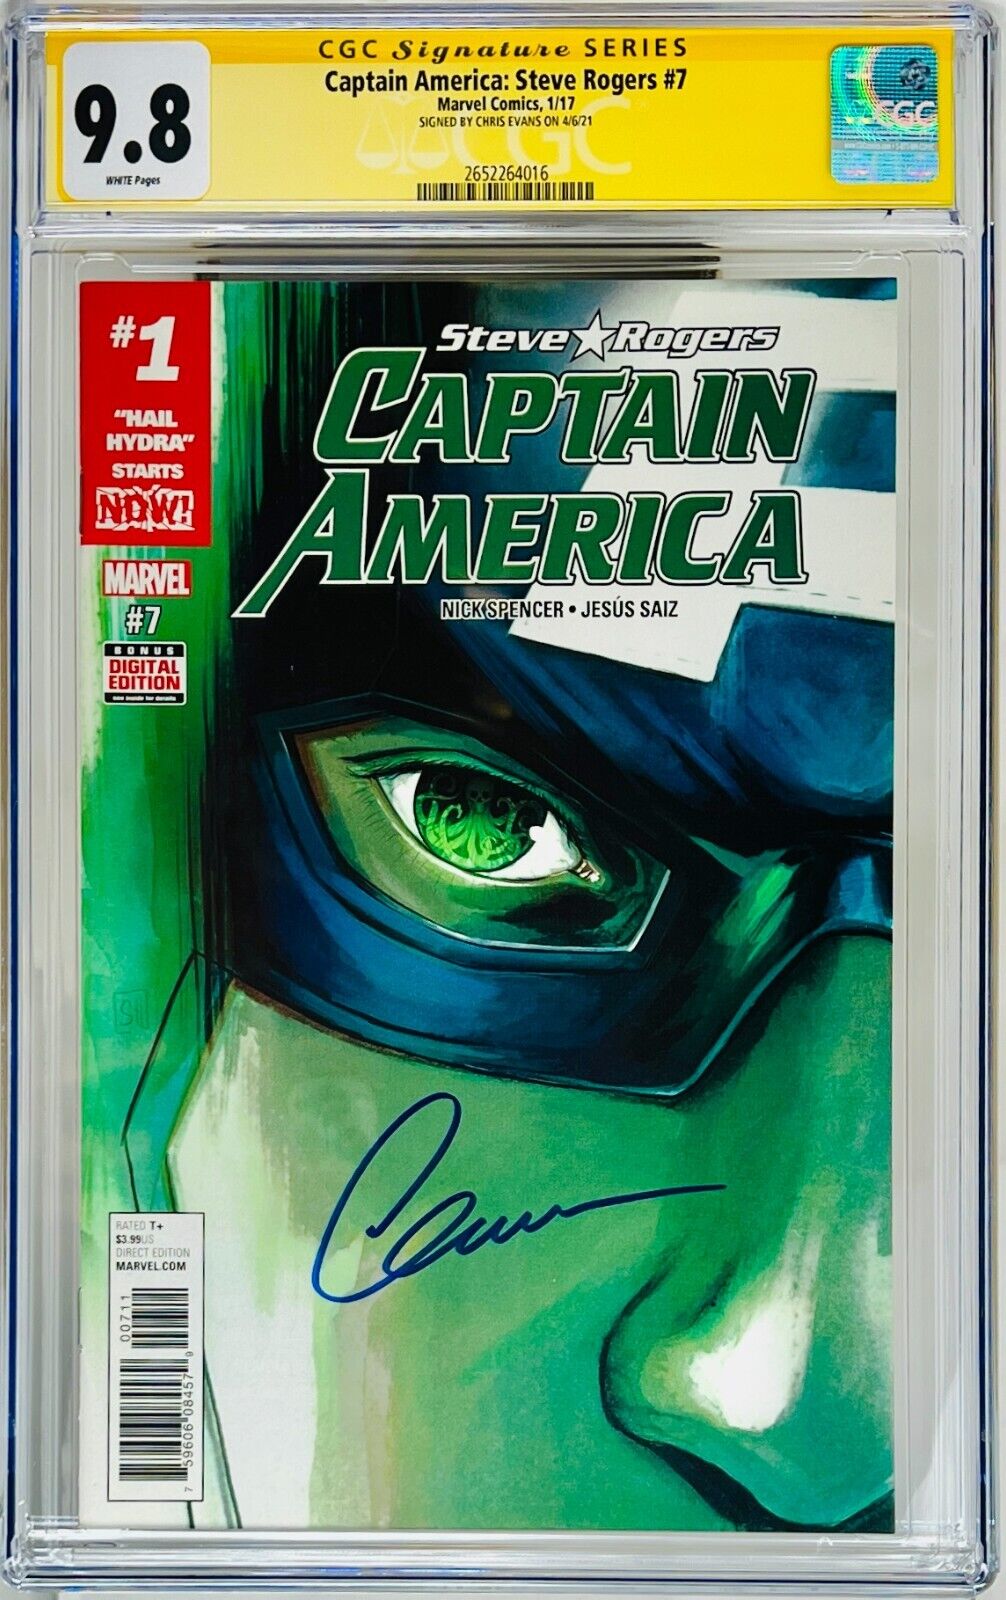 CGC SS Graded 9.8 Captain America: Steve Rodgers #7 Signed by Chris Evans